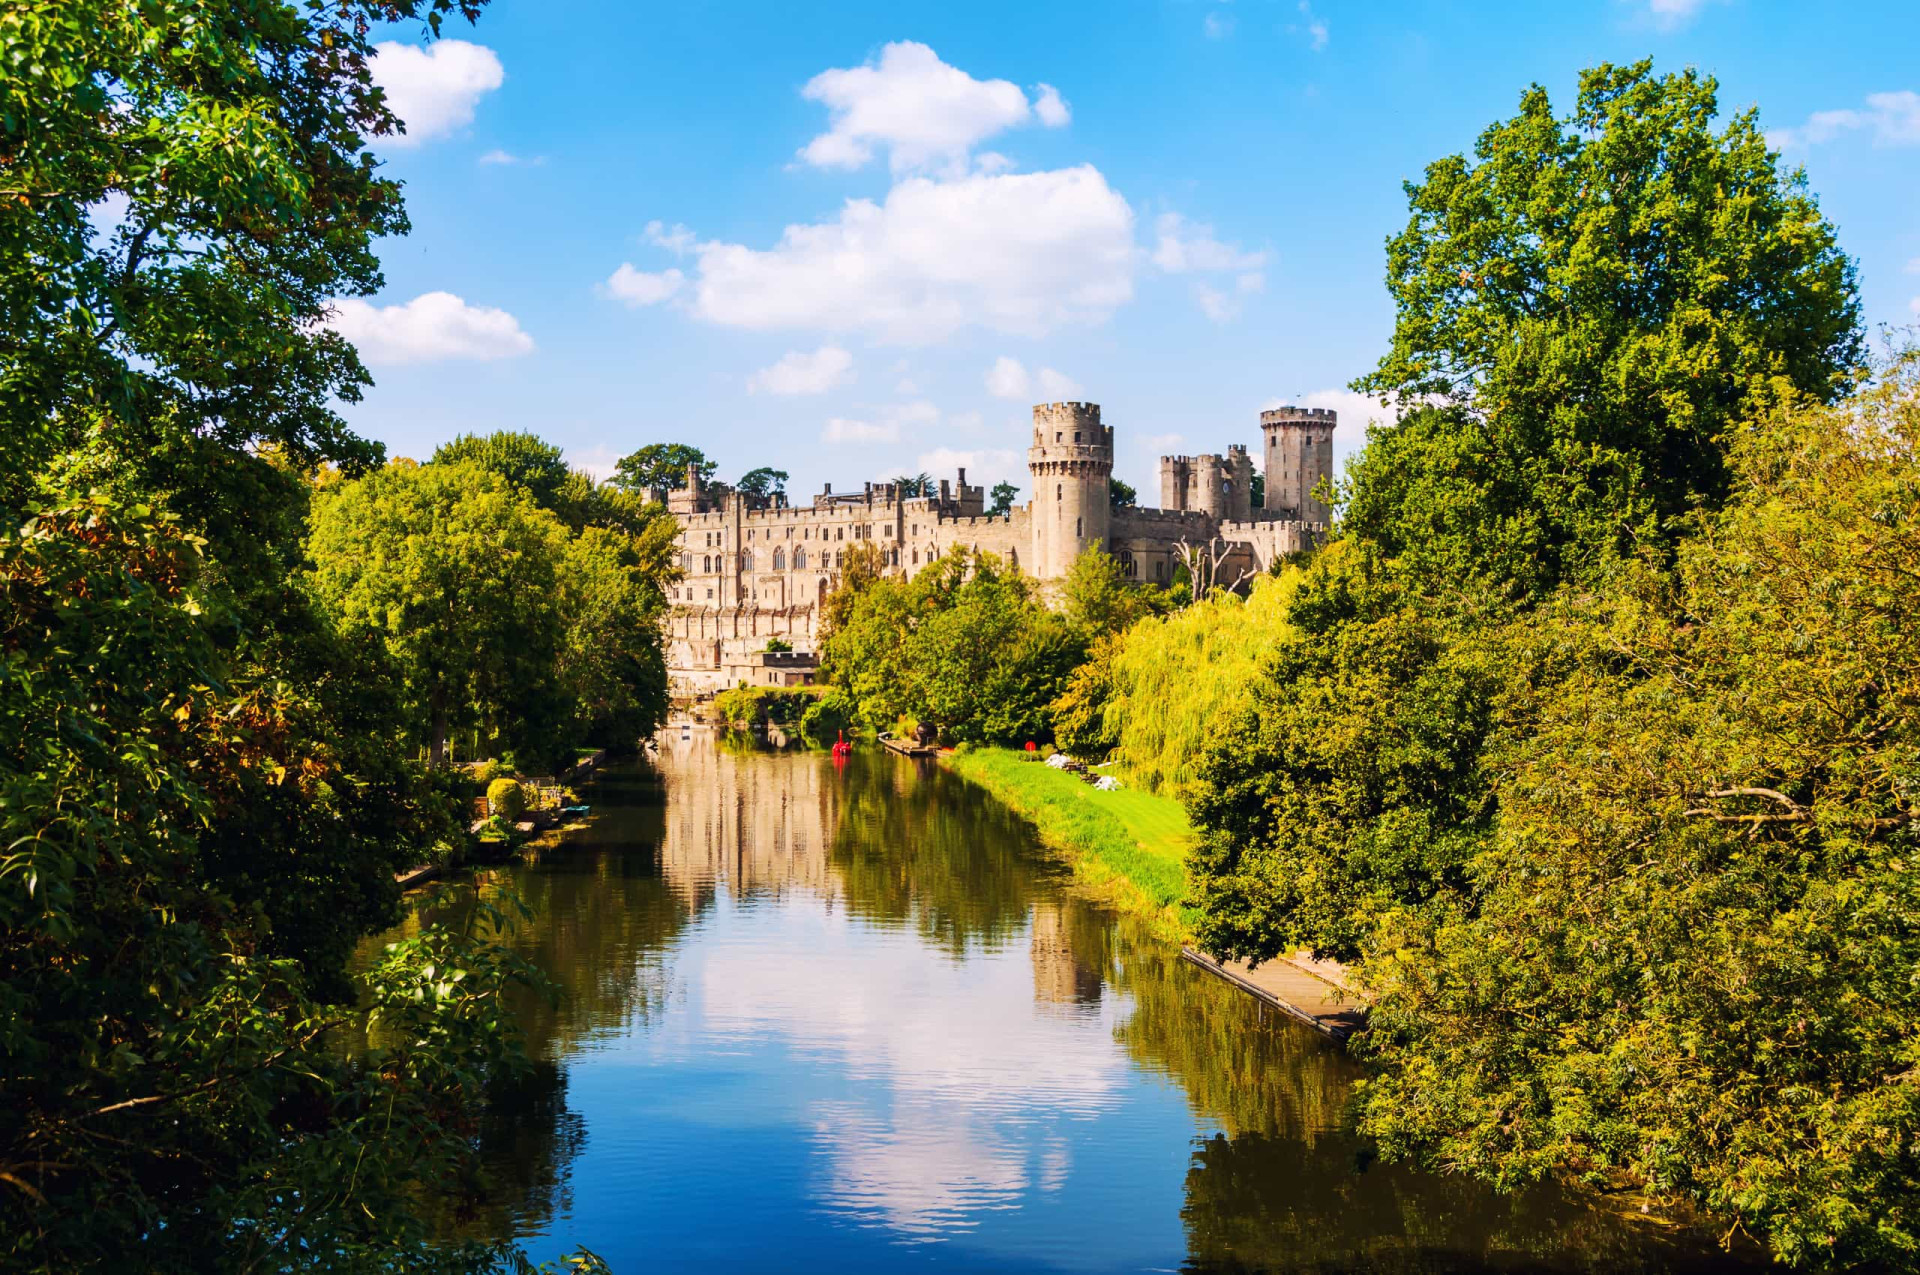 <p>One of the best reasons to visit Warwick in Warwickshire is to see Warwick Castle. It is a magical place where there are lots of exciting exhibitions and interactive activities. You can also visit the Lord Leycester Hospital to learn about the area's history.</p><p>You may also like:<a href="https://www.starsinsider.com/n/222440?utm_source=msn.com&utm_medium=display&utm_campaign=referral_description&utm_content=471299v4en-en"> The strangest wedding photos ever taken</a></p>